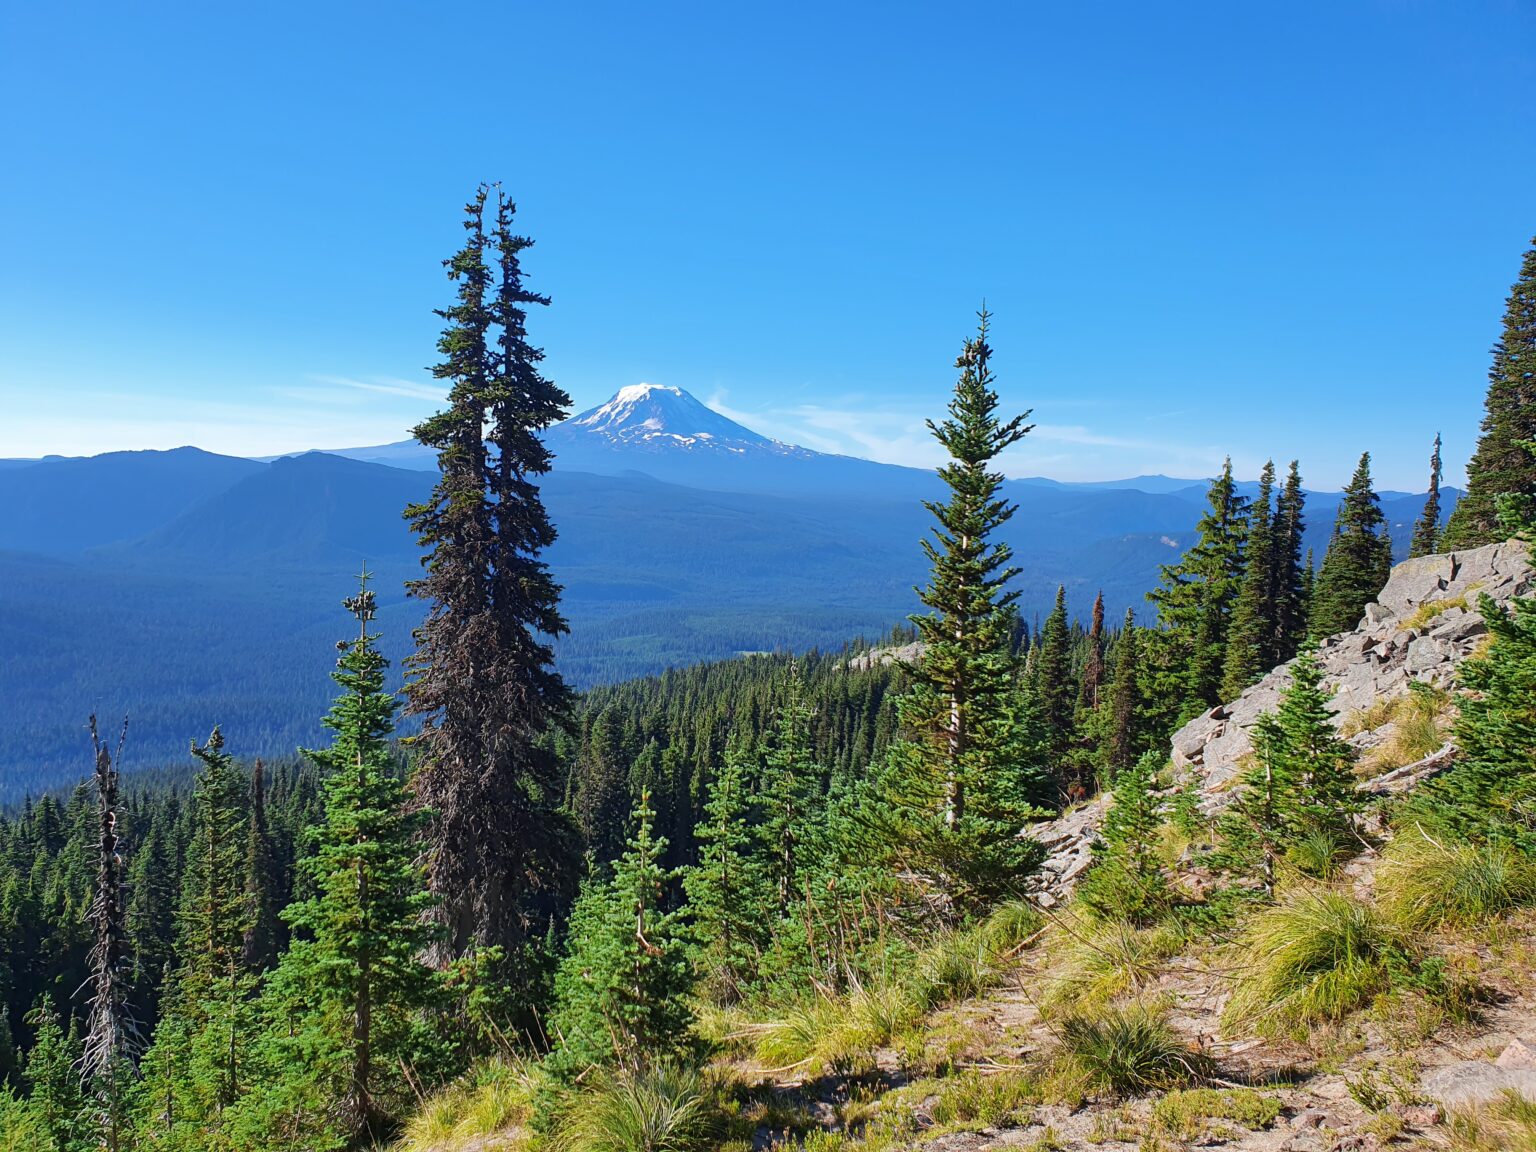 Looking at Mount Adams to the South